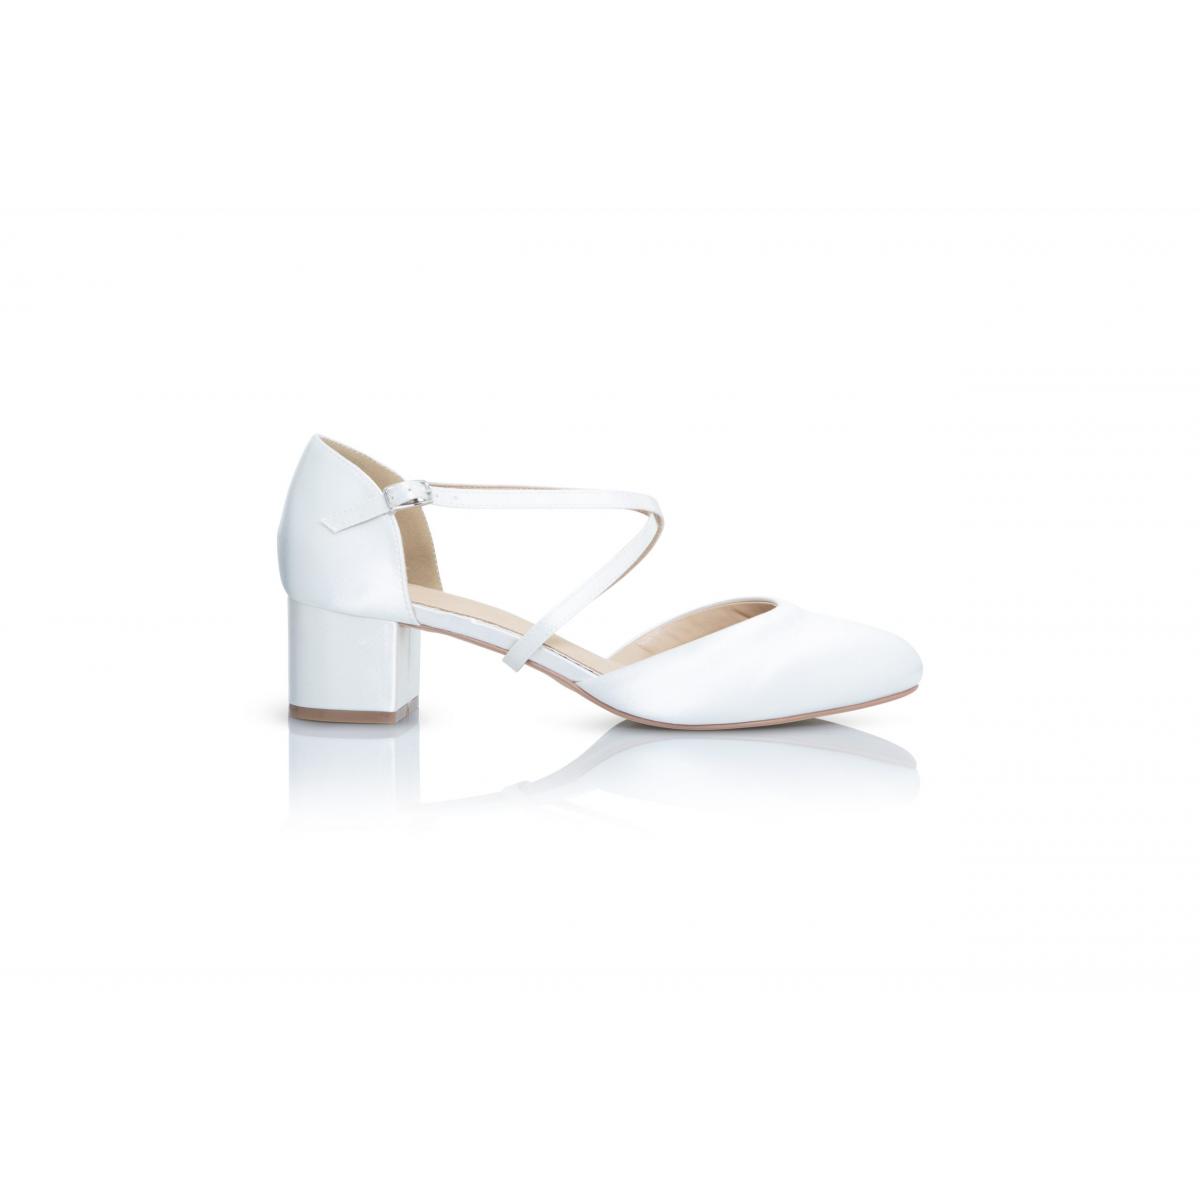 Perfect Bridal Remi Shoes - Ivory Satin 1